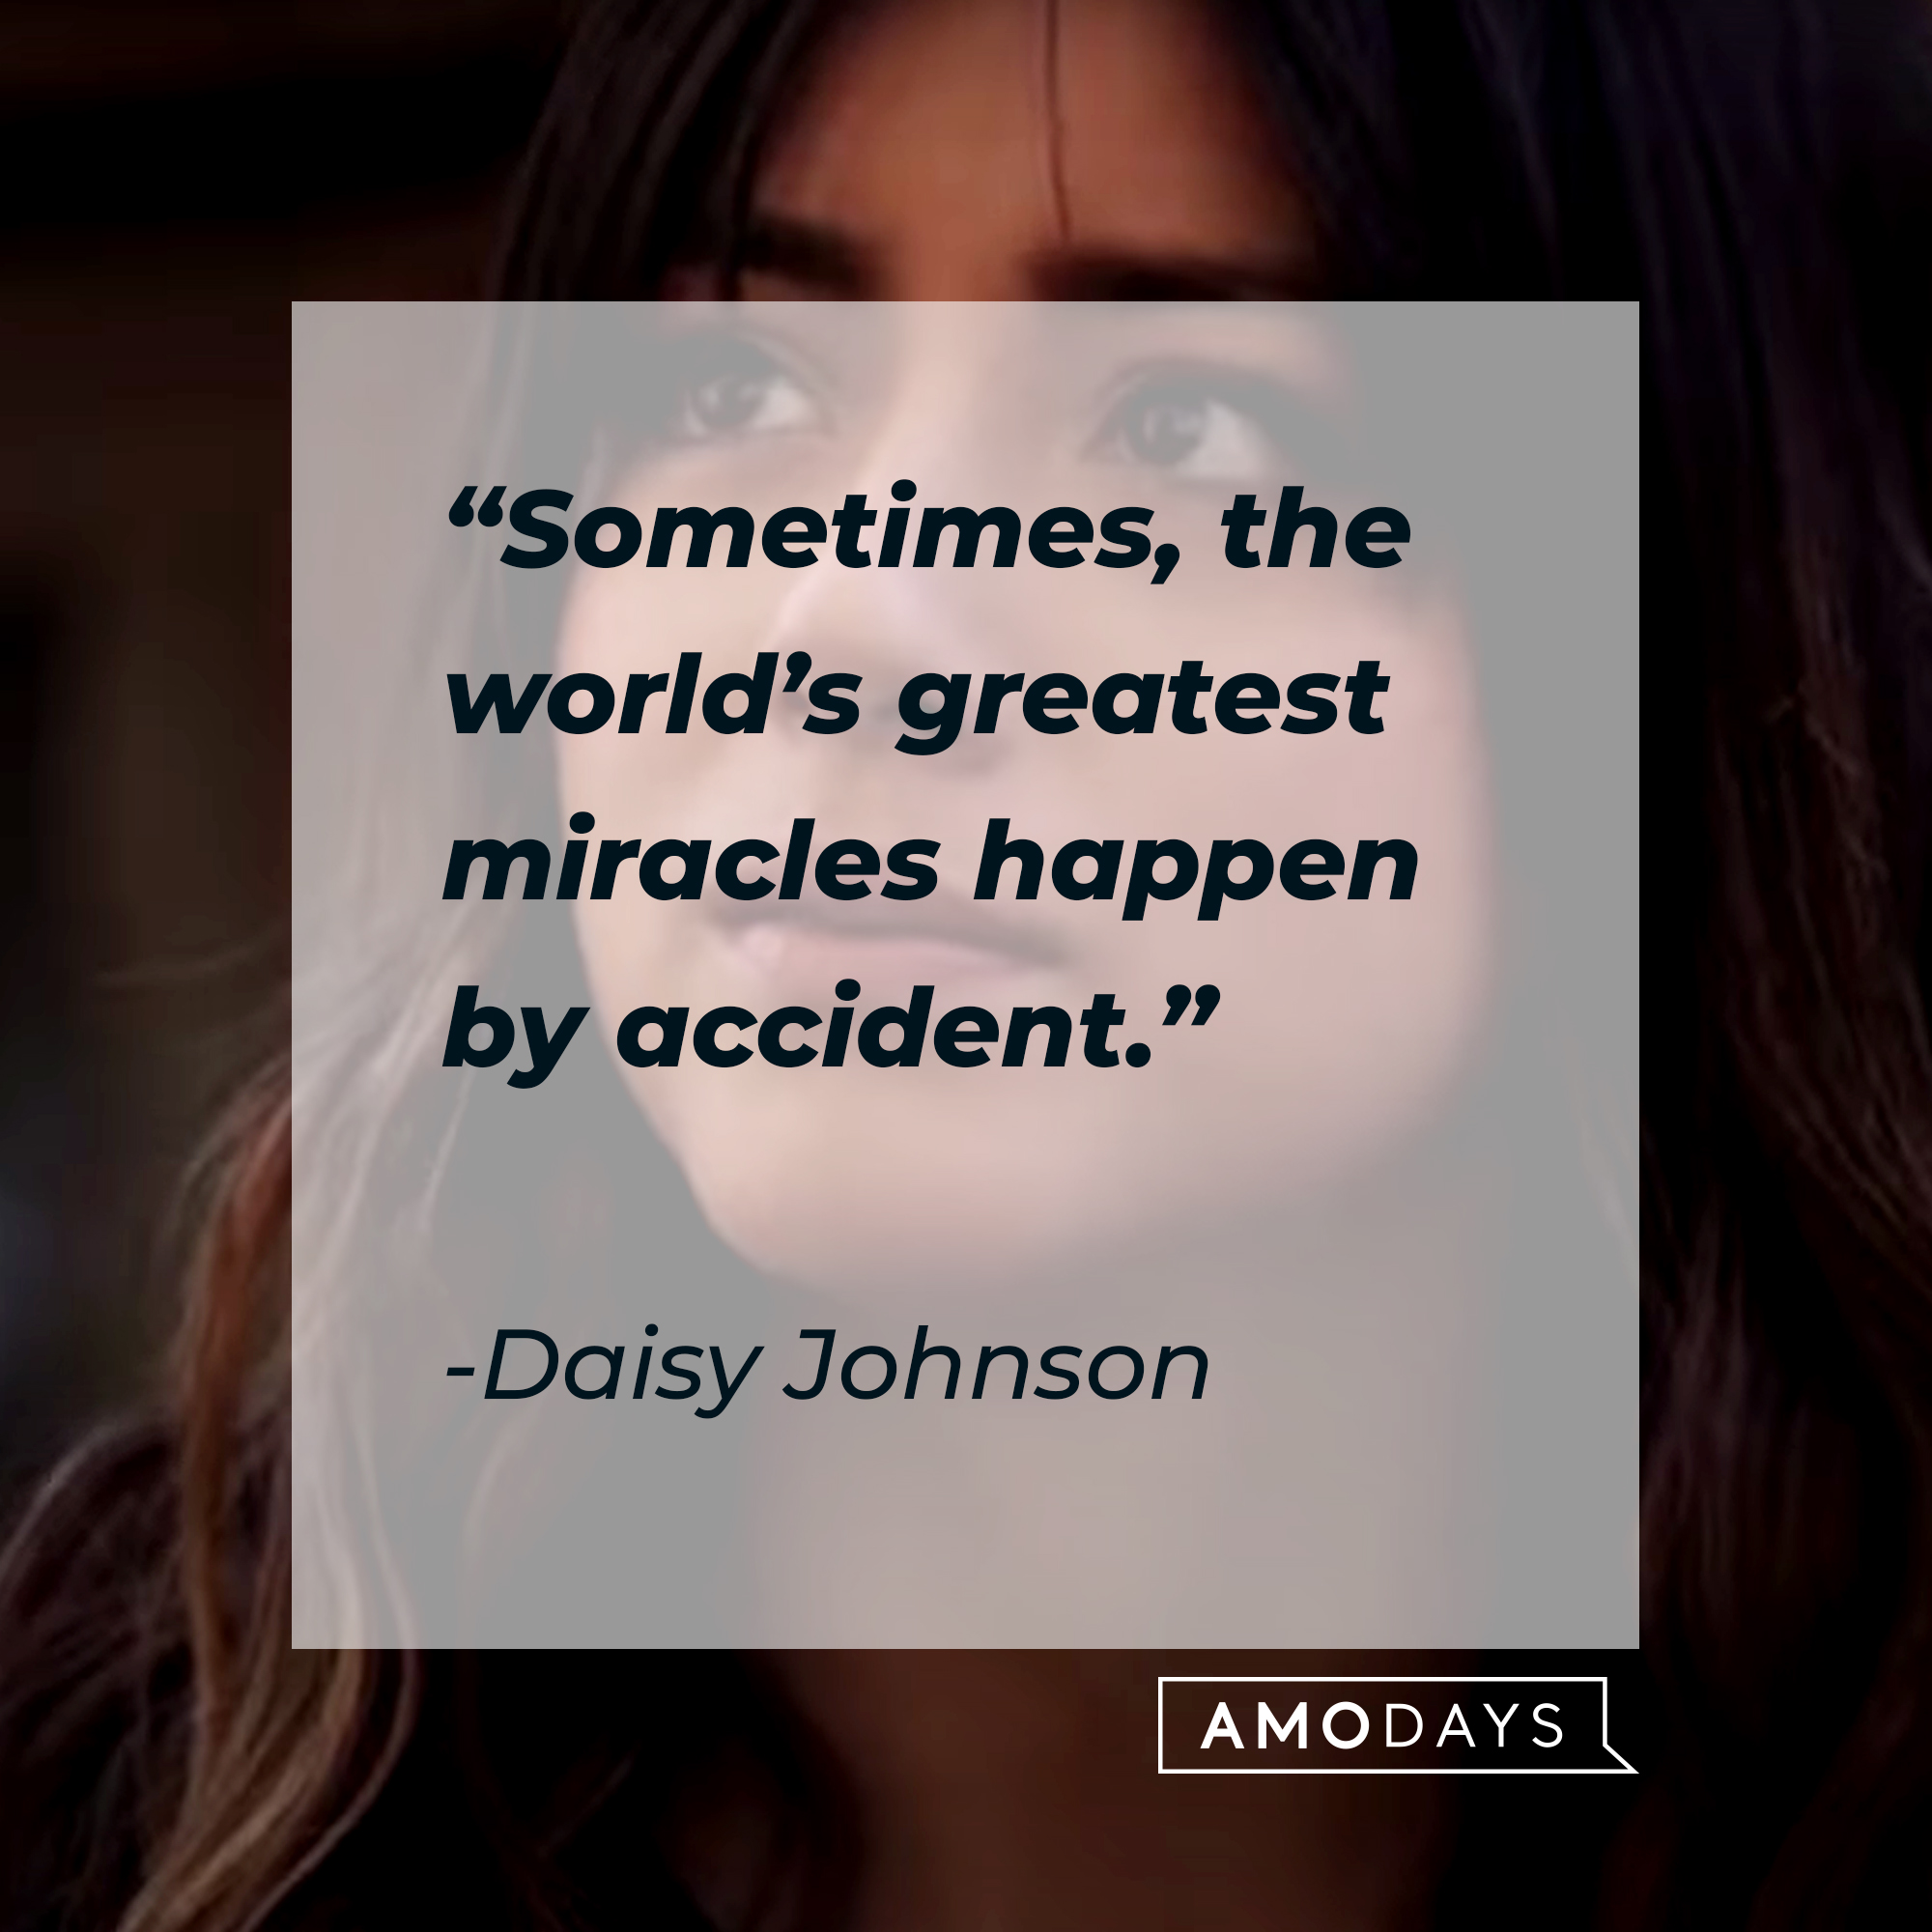 Daisy Johnson, with her quote: "Sometimes, the world's greatest miracles happen by accident." | Source: Facebook.com/AgentsofShield